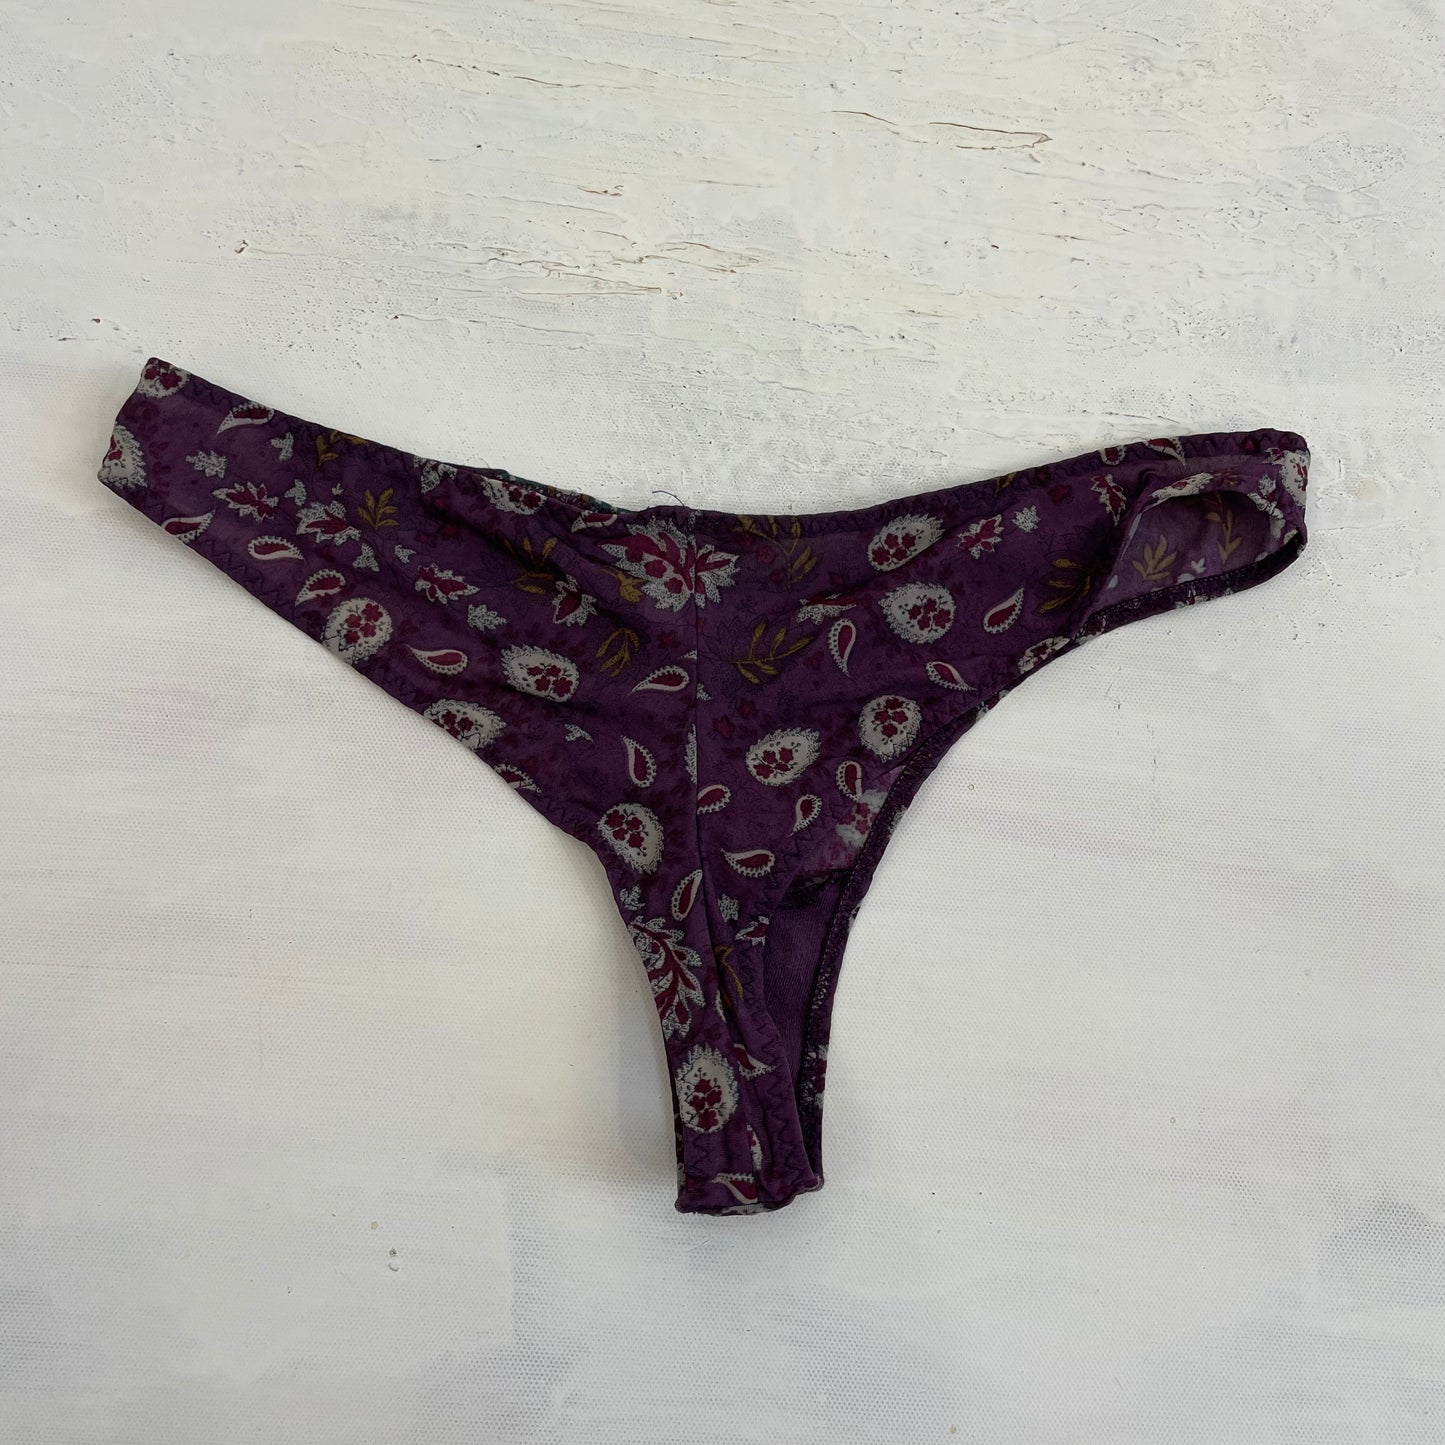 GIRL CORE DROP | small purple intimissimi mesh patterned thong